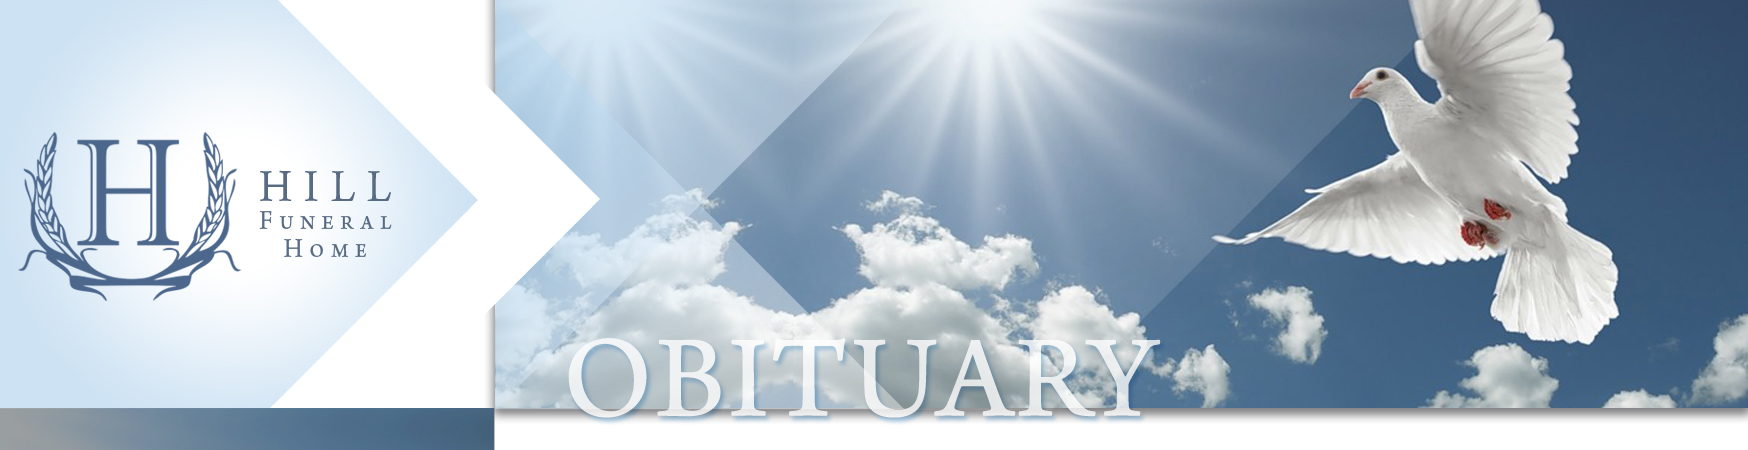 Grace Boulter Obituary - Hill Funeral Home